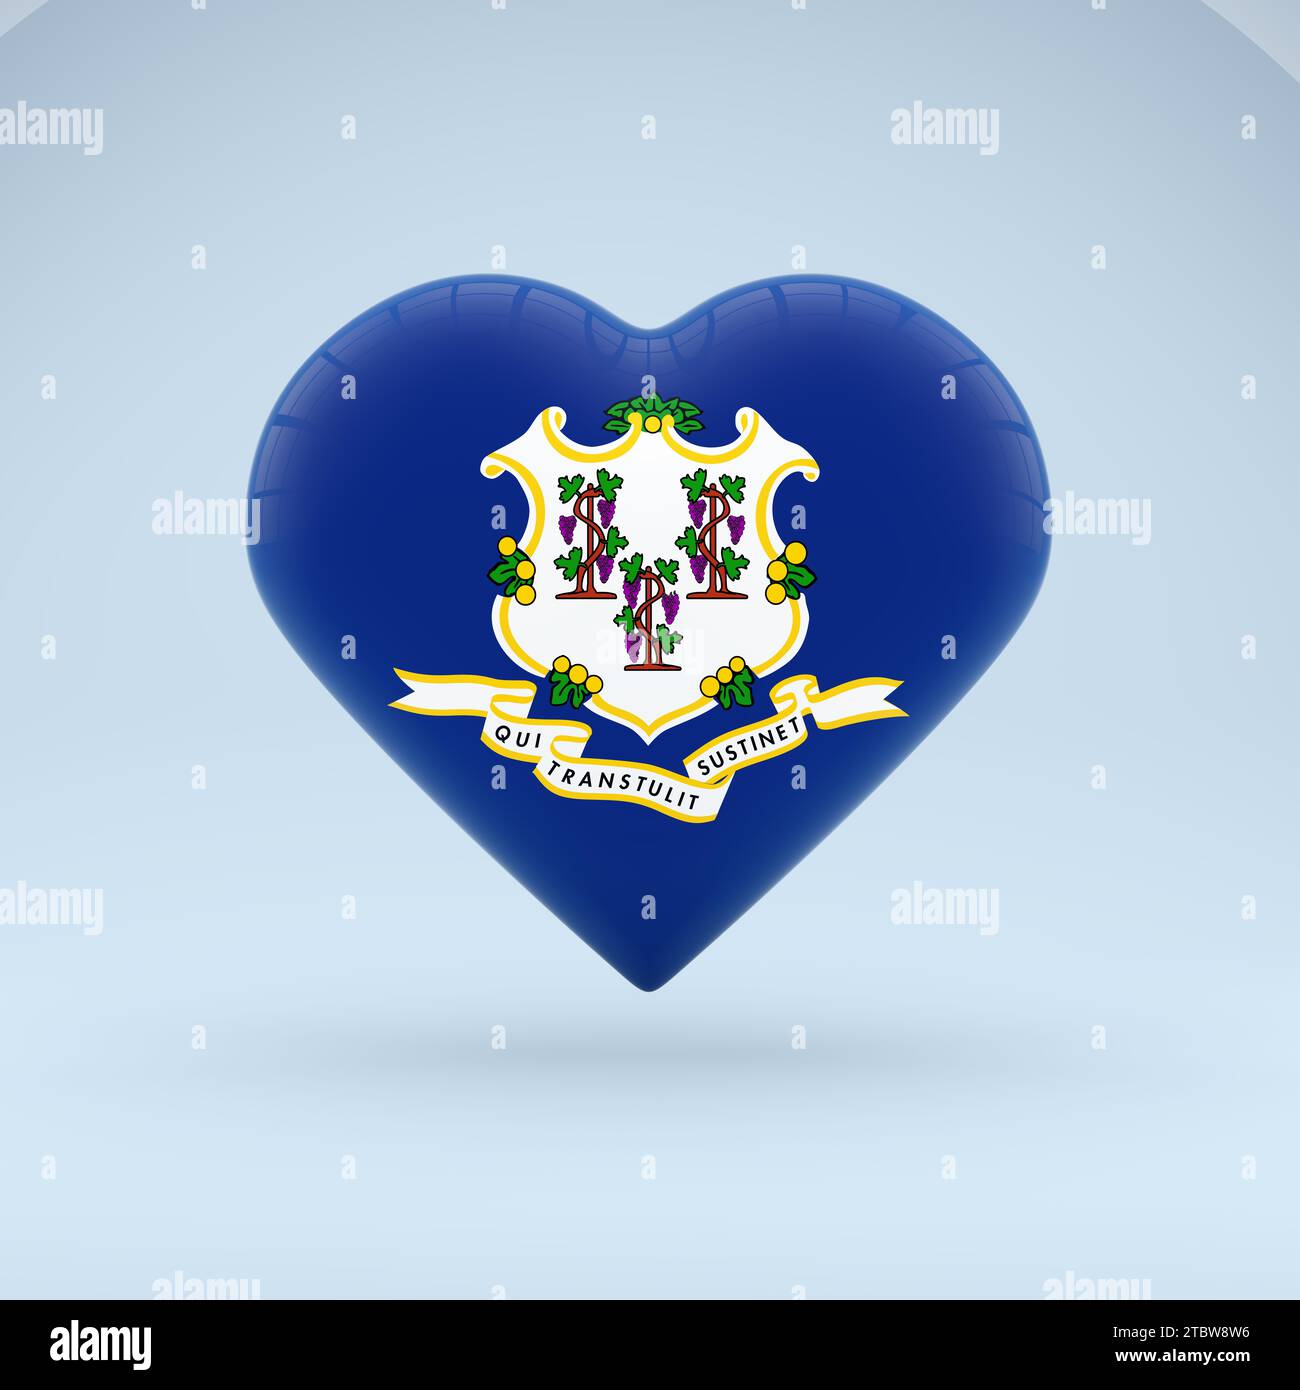 Love Connecticut state symbol. Heart flag icon. Stock Photo